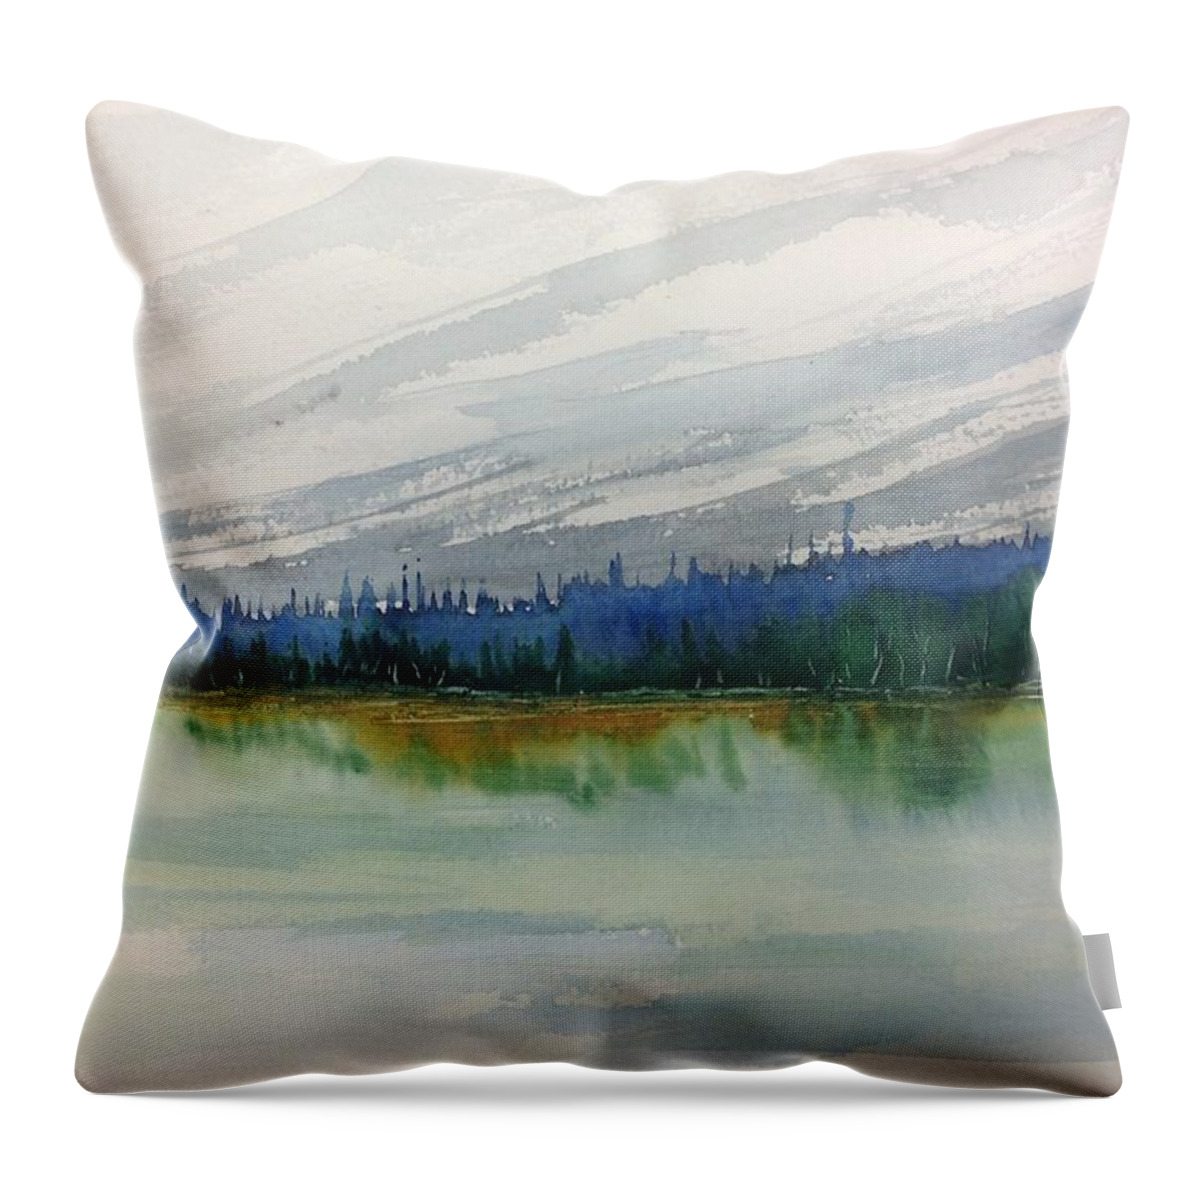 Watercolour Landscape Painting Throw Pillow featuring the painting Lakeside - Mountain Foothill - Banff by Desmond Raymond